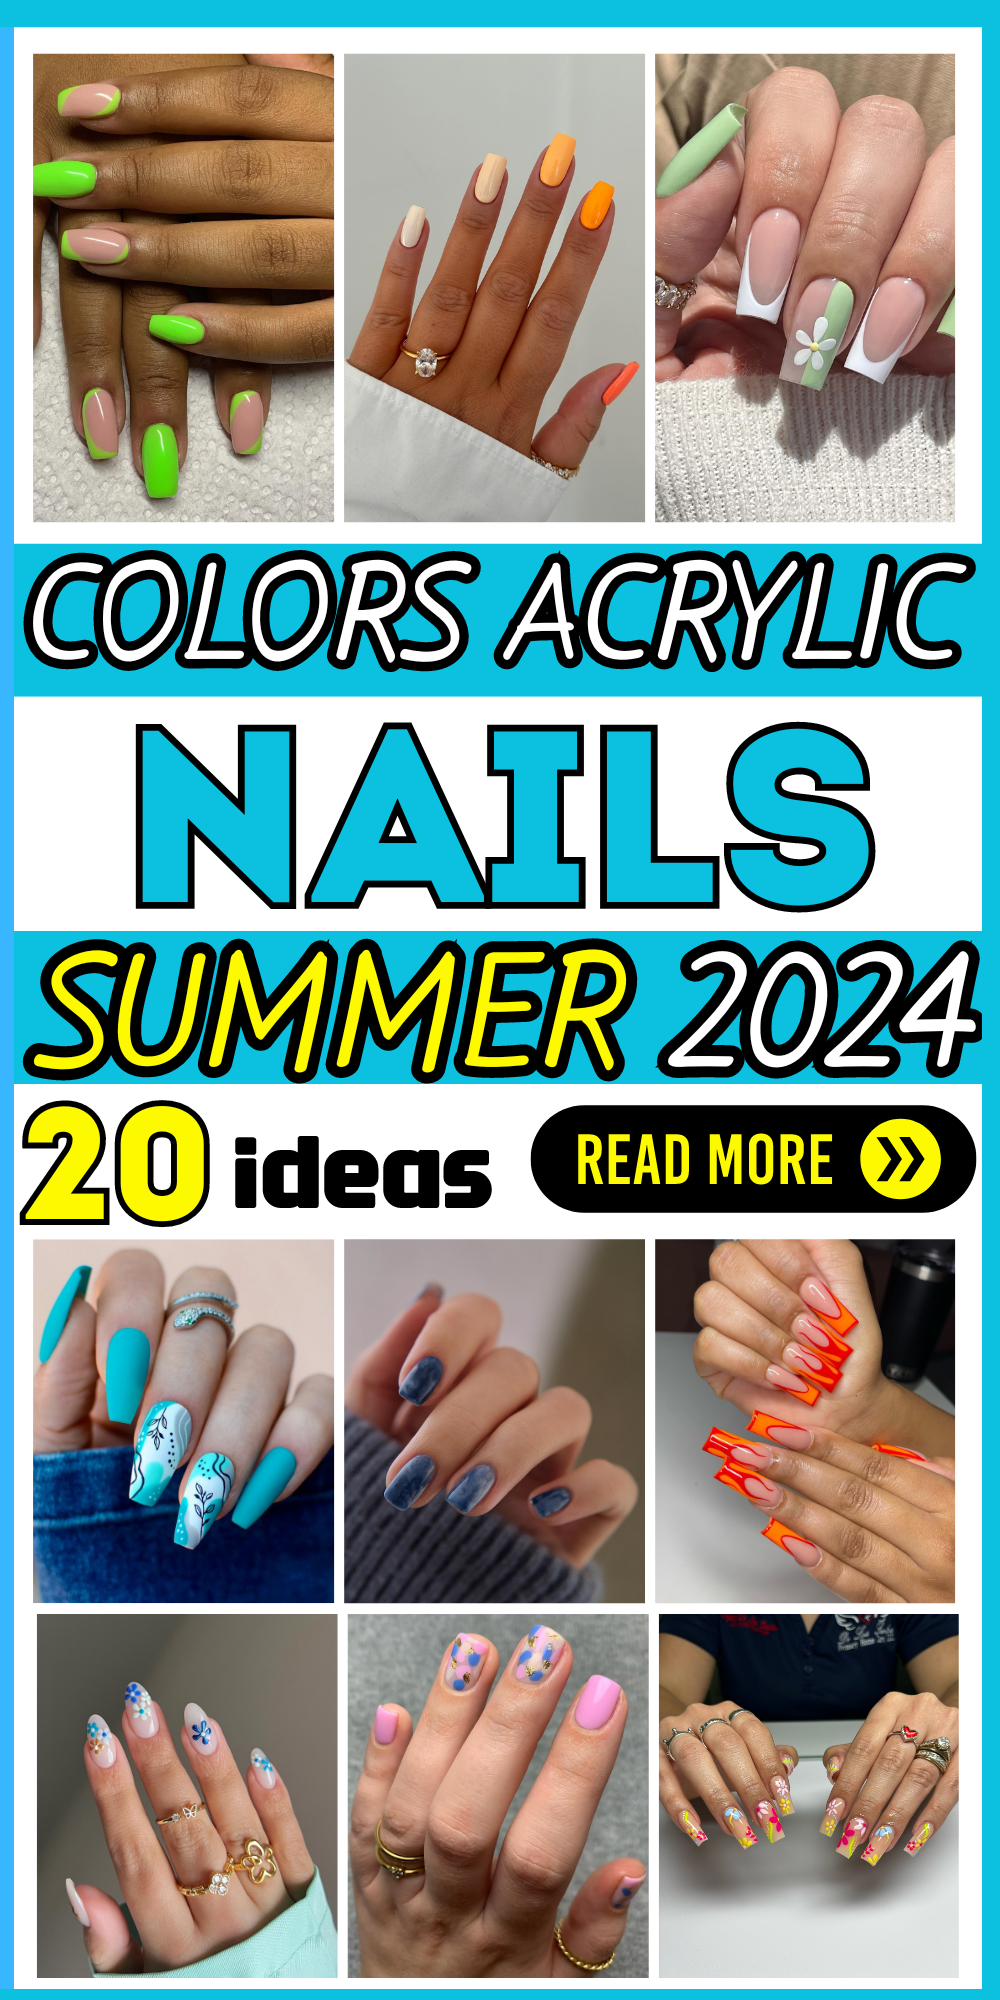 Vibrant Summer Acrylic Nail Trends: Pastel Perfection & Floral Elegance